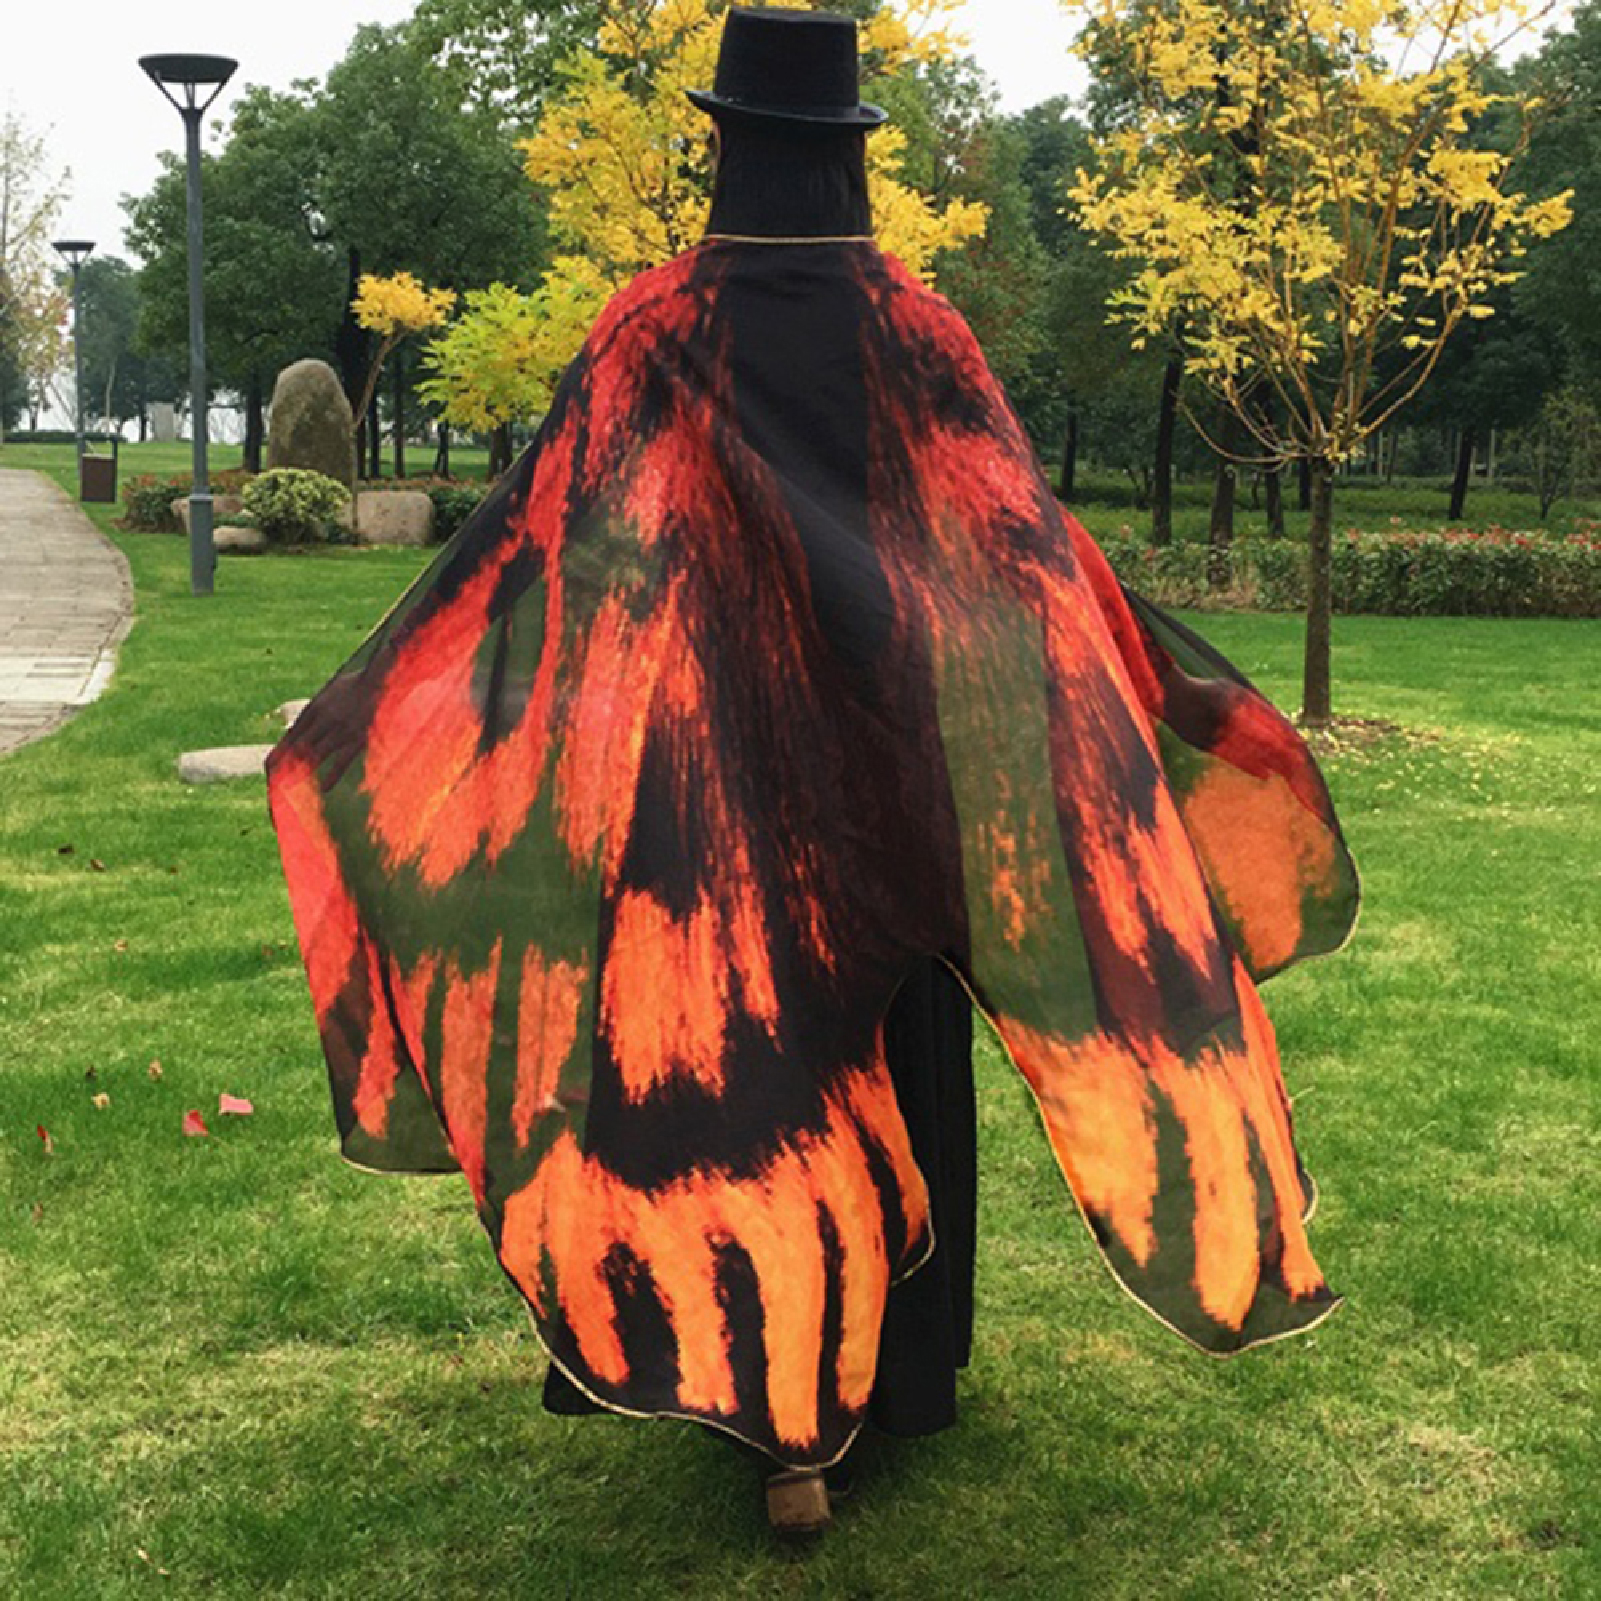 Women Wrap Shawl Cover Up Beautiful Butterfly Wing Towel Fancy Cape Scarf Gift